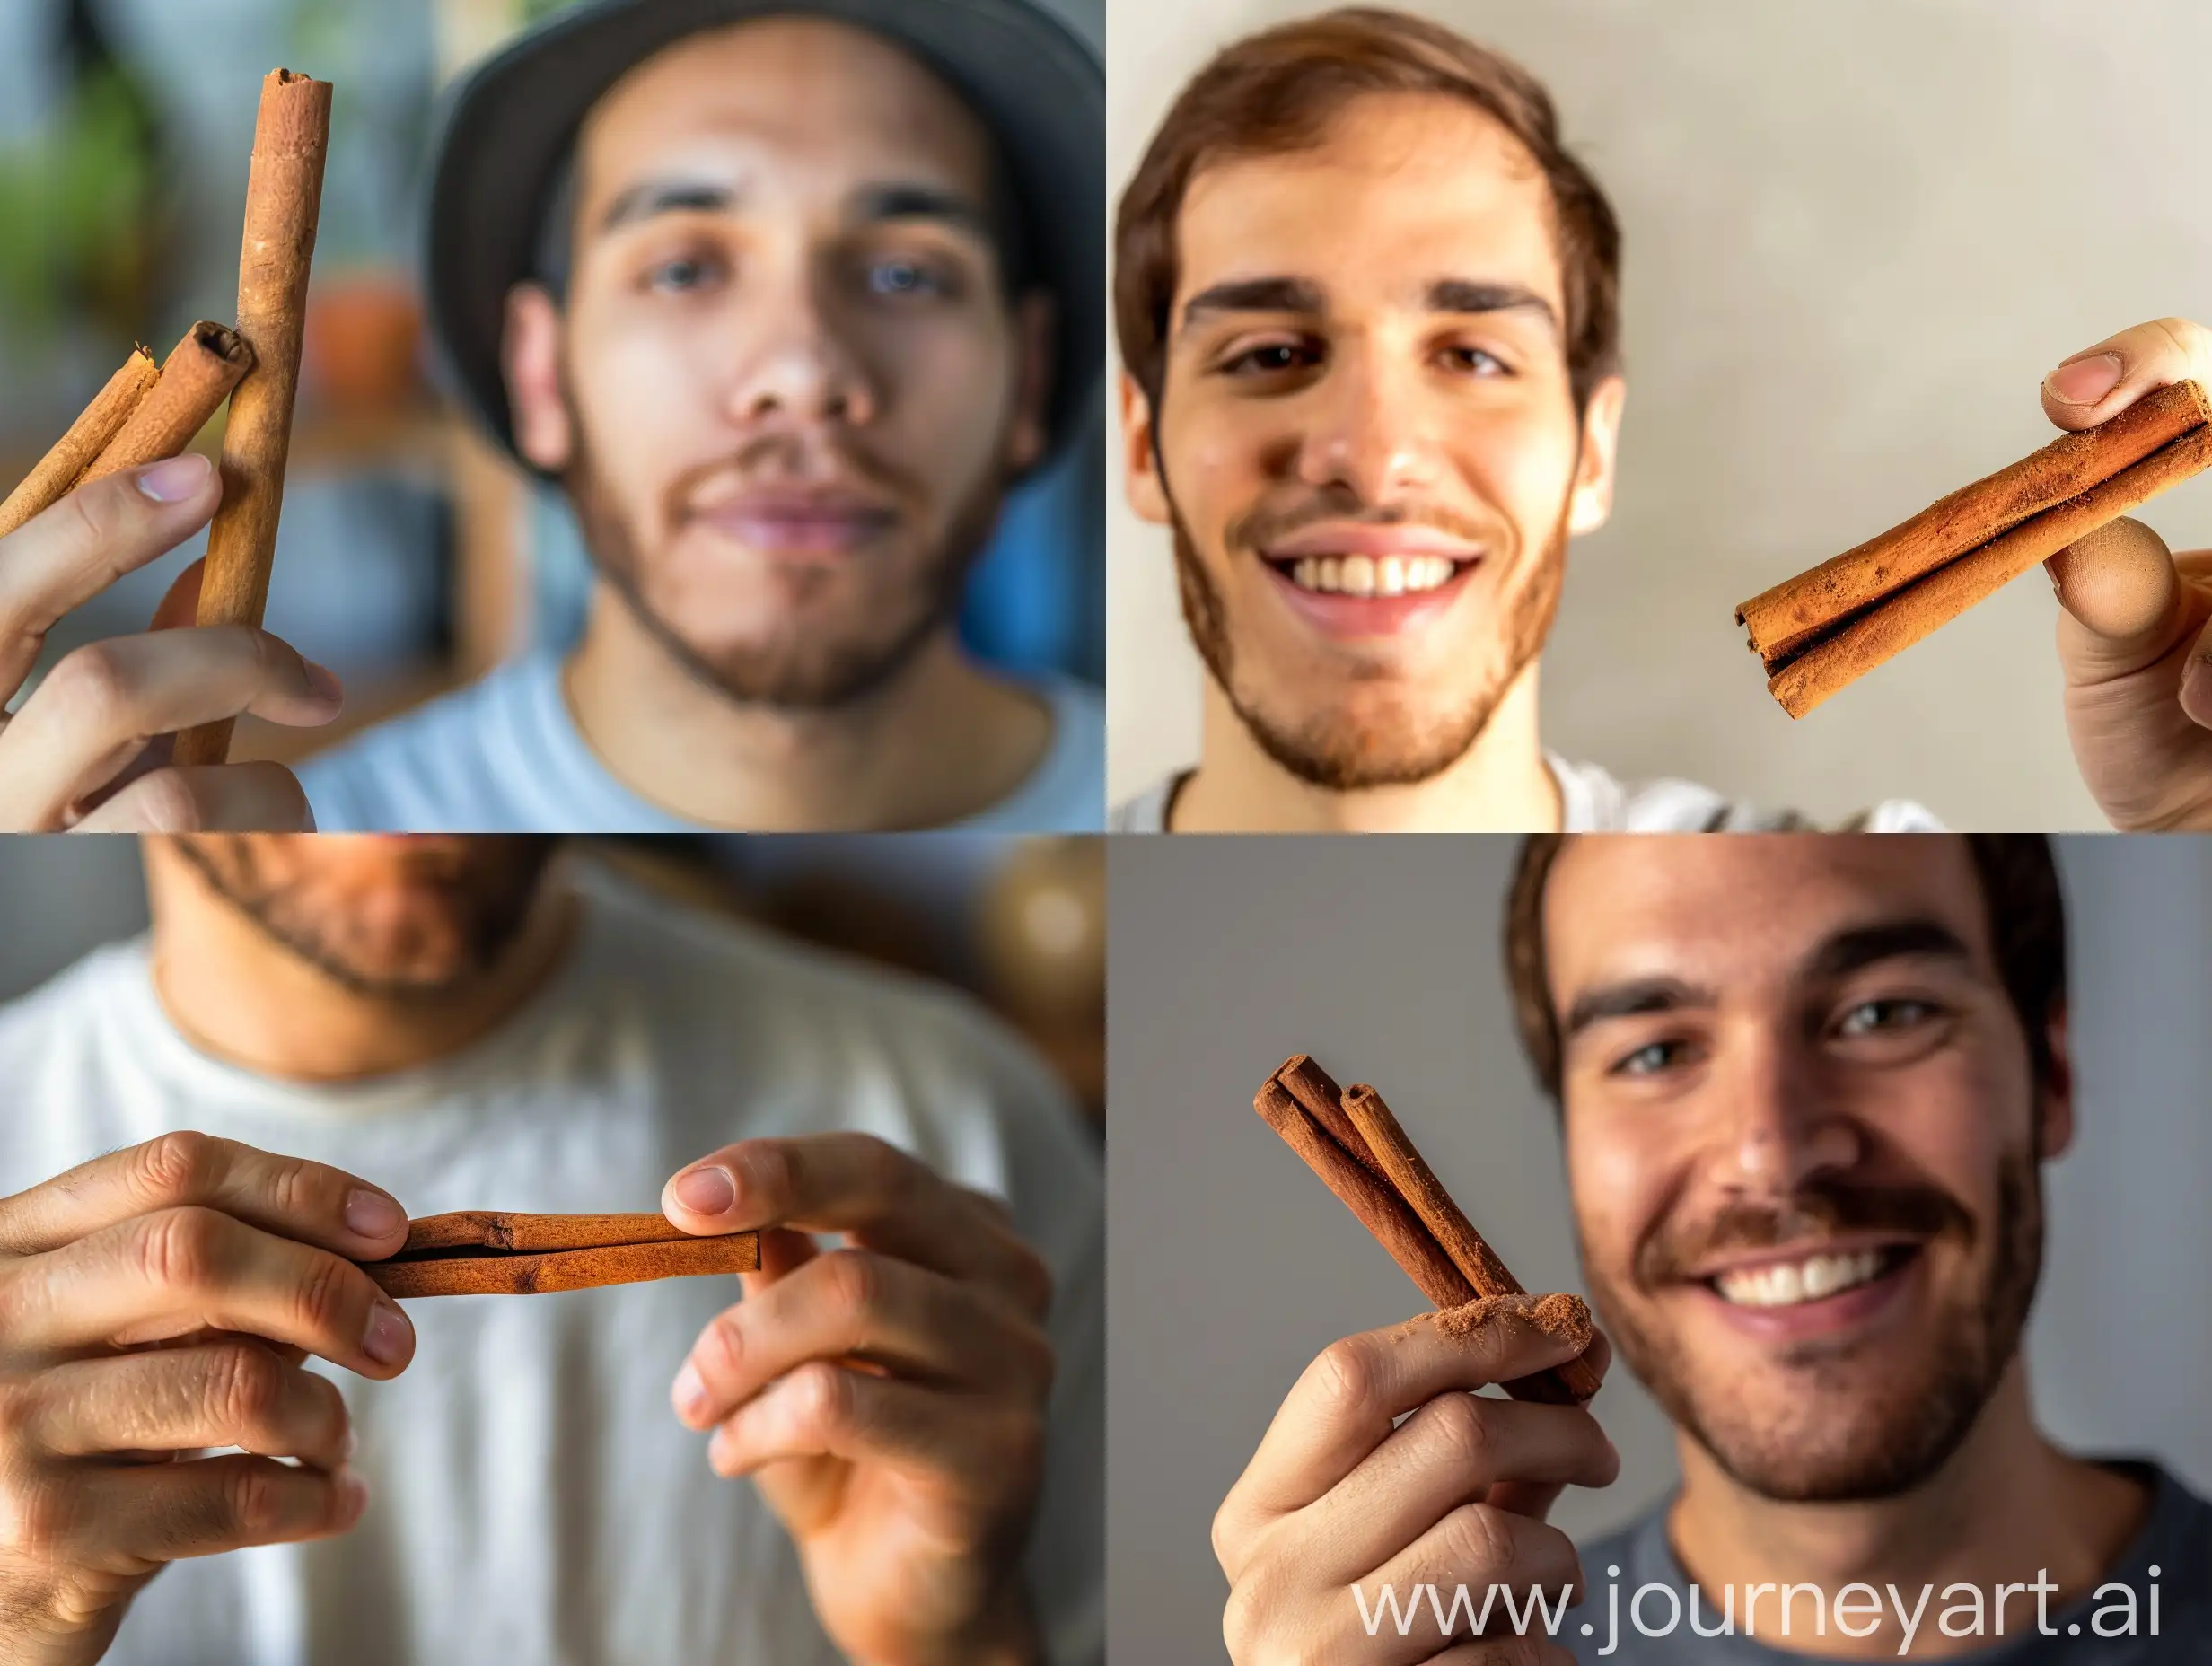 A photo of a man holding a cinnamon stick and showing it